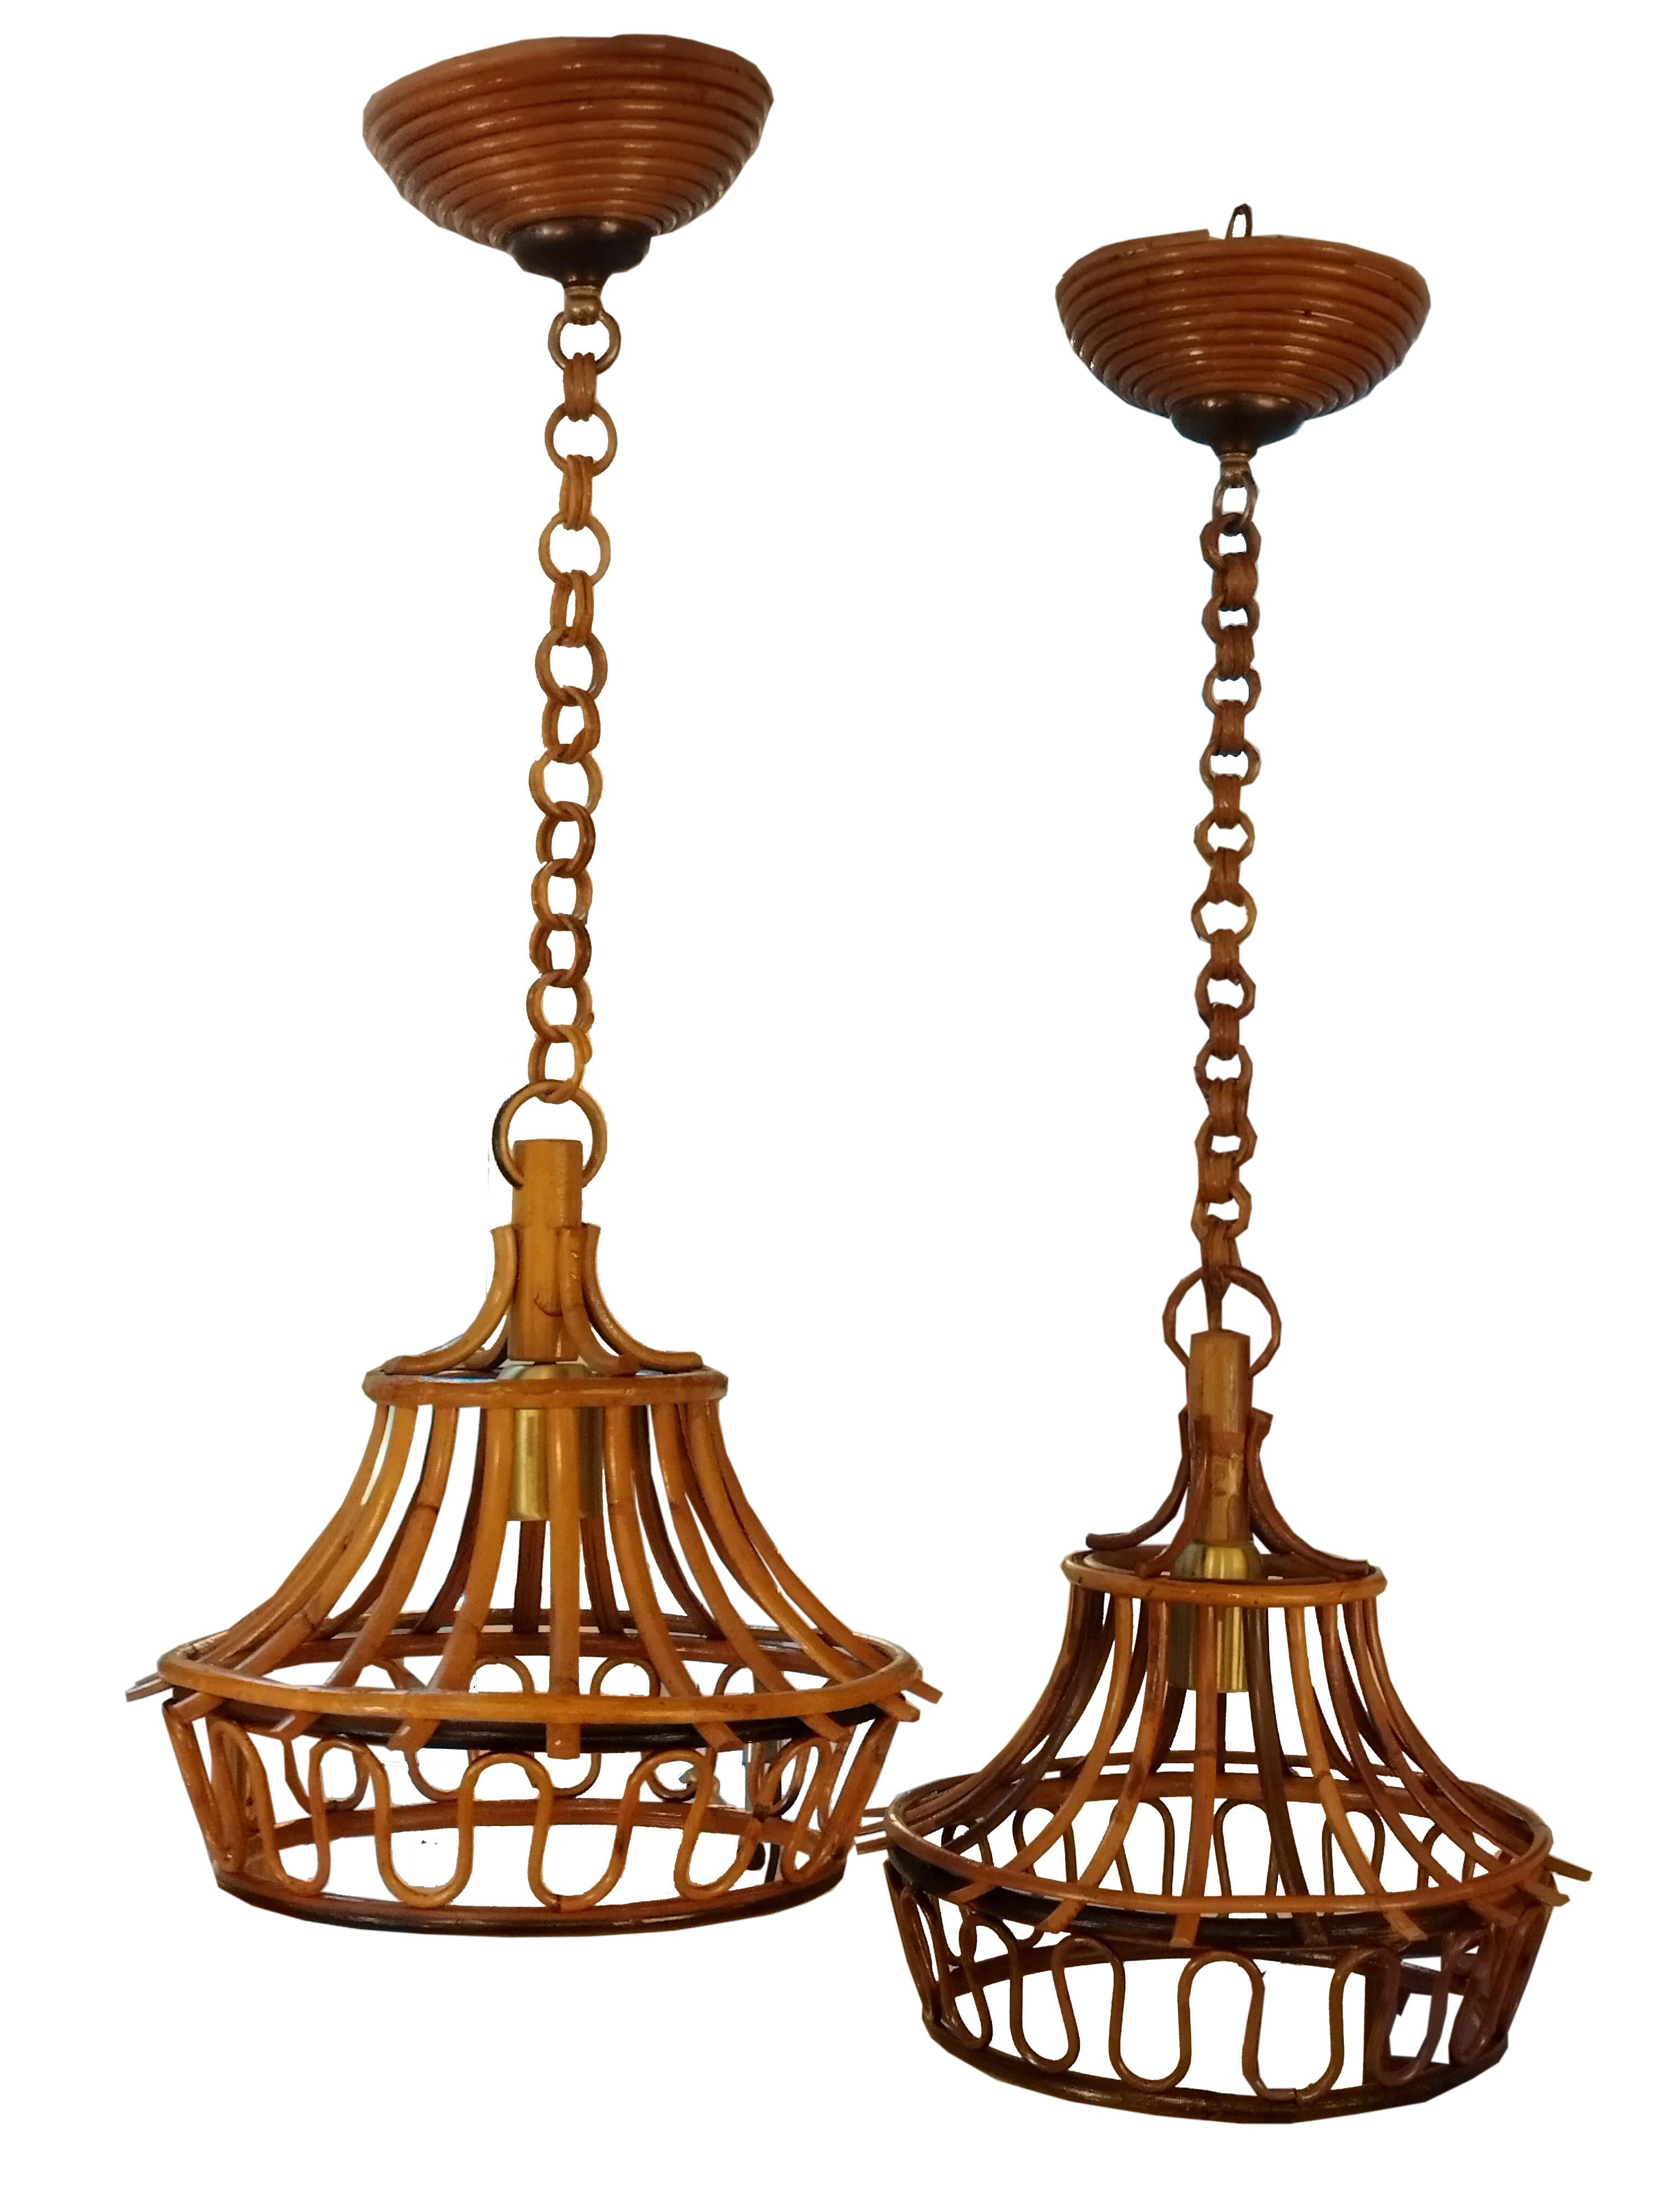 Pair of pendant lamps made entirely by hand from rattan and bamboo, hanging from a rattan round-link chain that can be shortened to adjust the height. The lamps are Italian from the 1960s and in good condition.